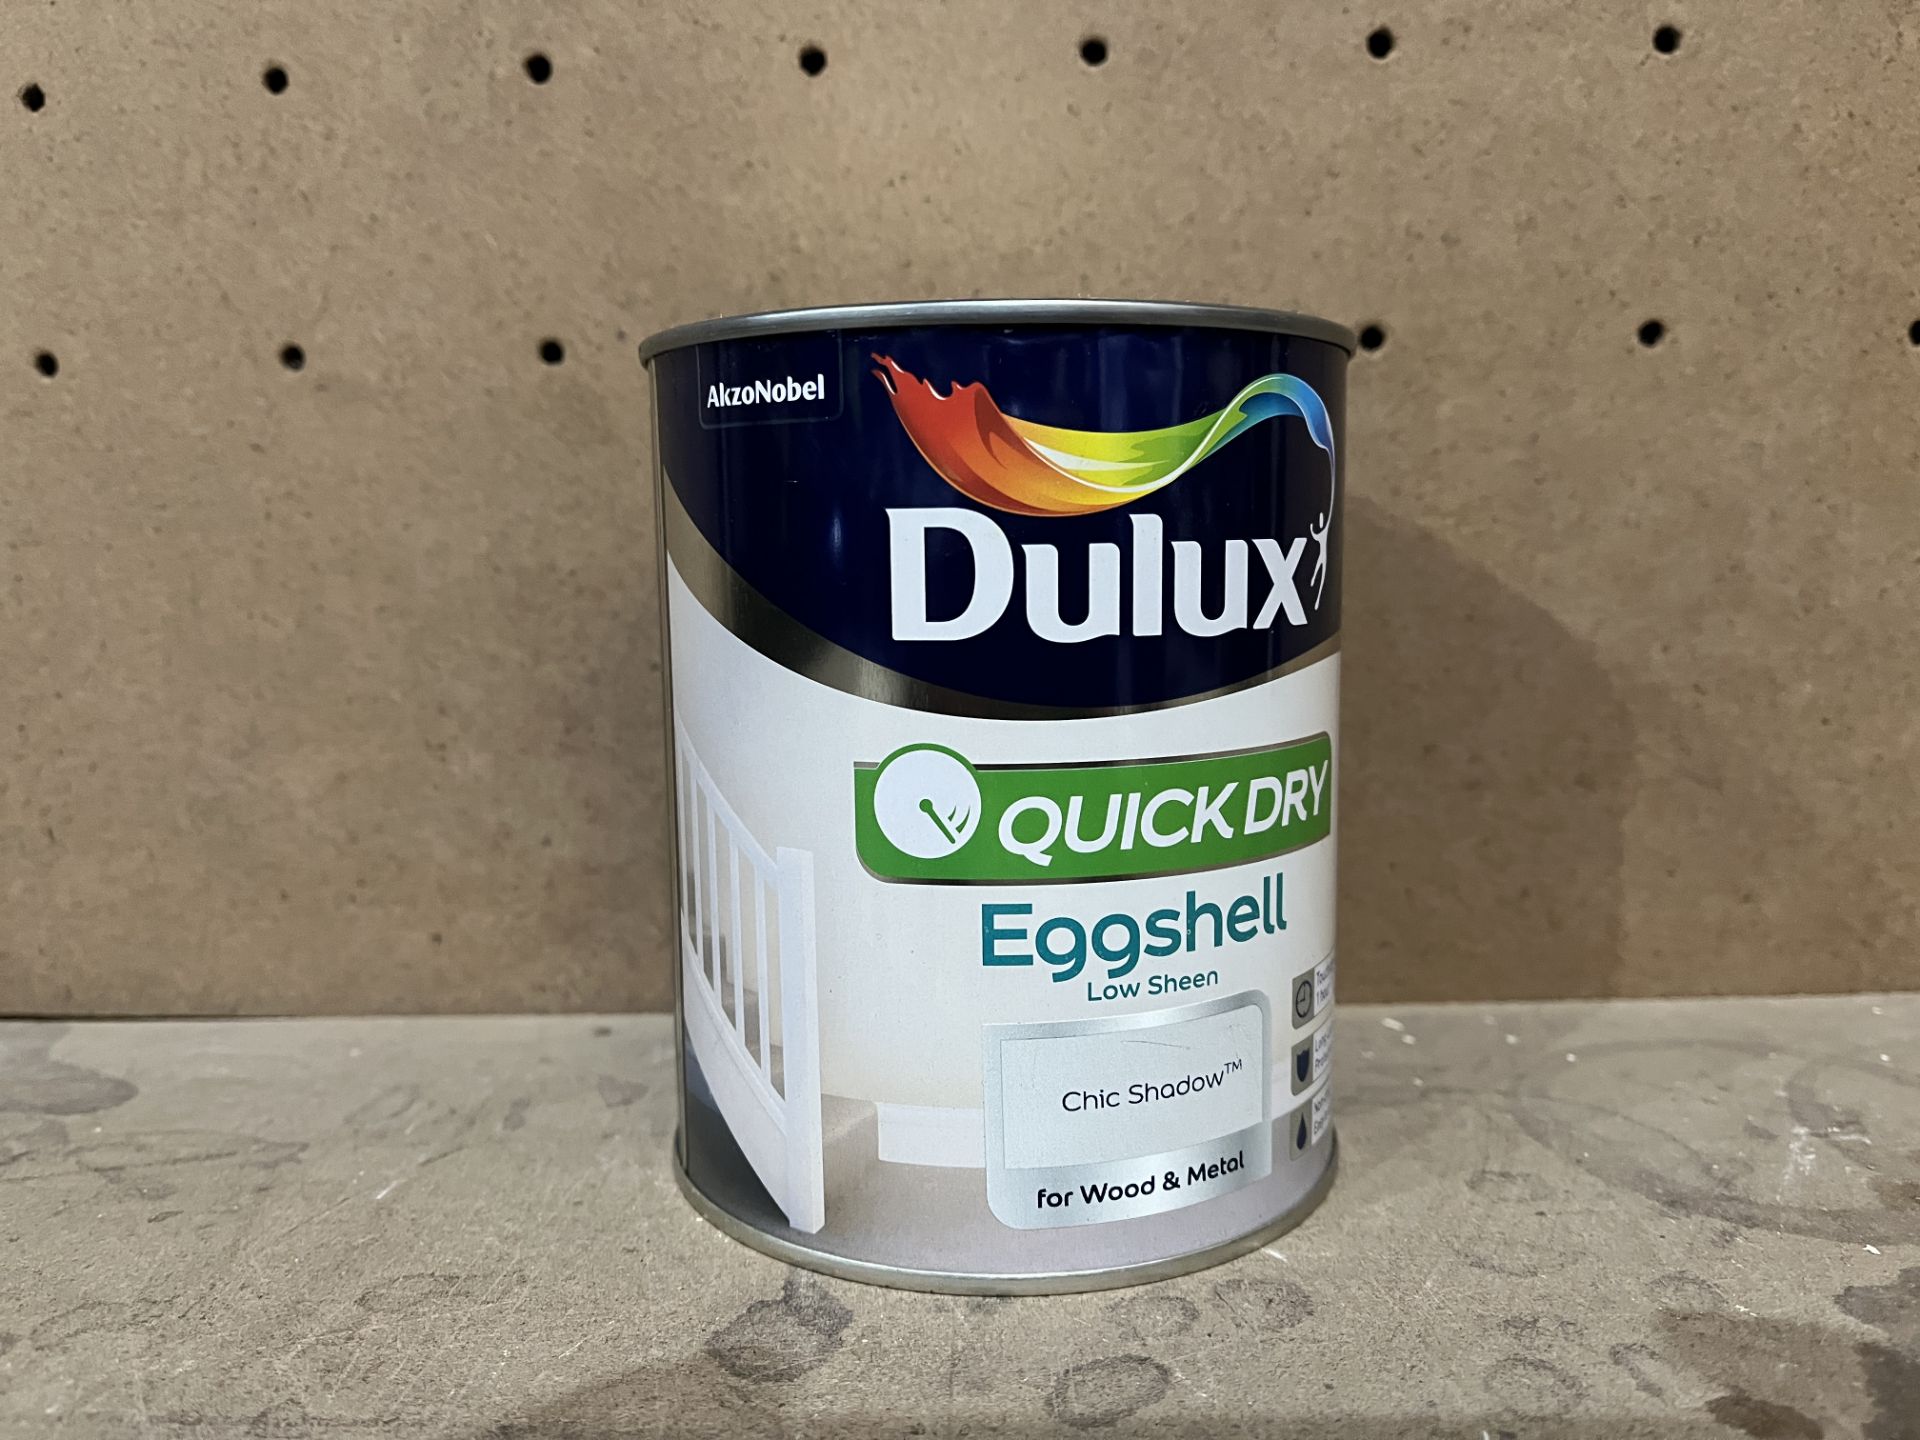 13 X BRAND NEW DULUX QUICK DRY CHIC SHADOW EGGSHELL METAL AND WOOD PAINT 750ML PCK